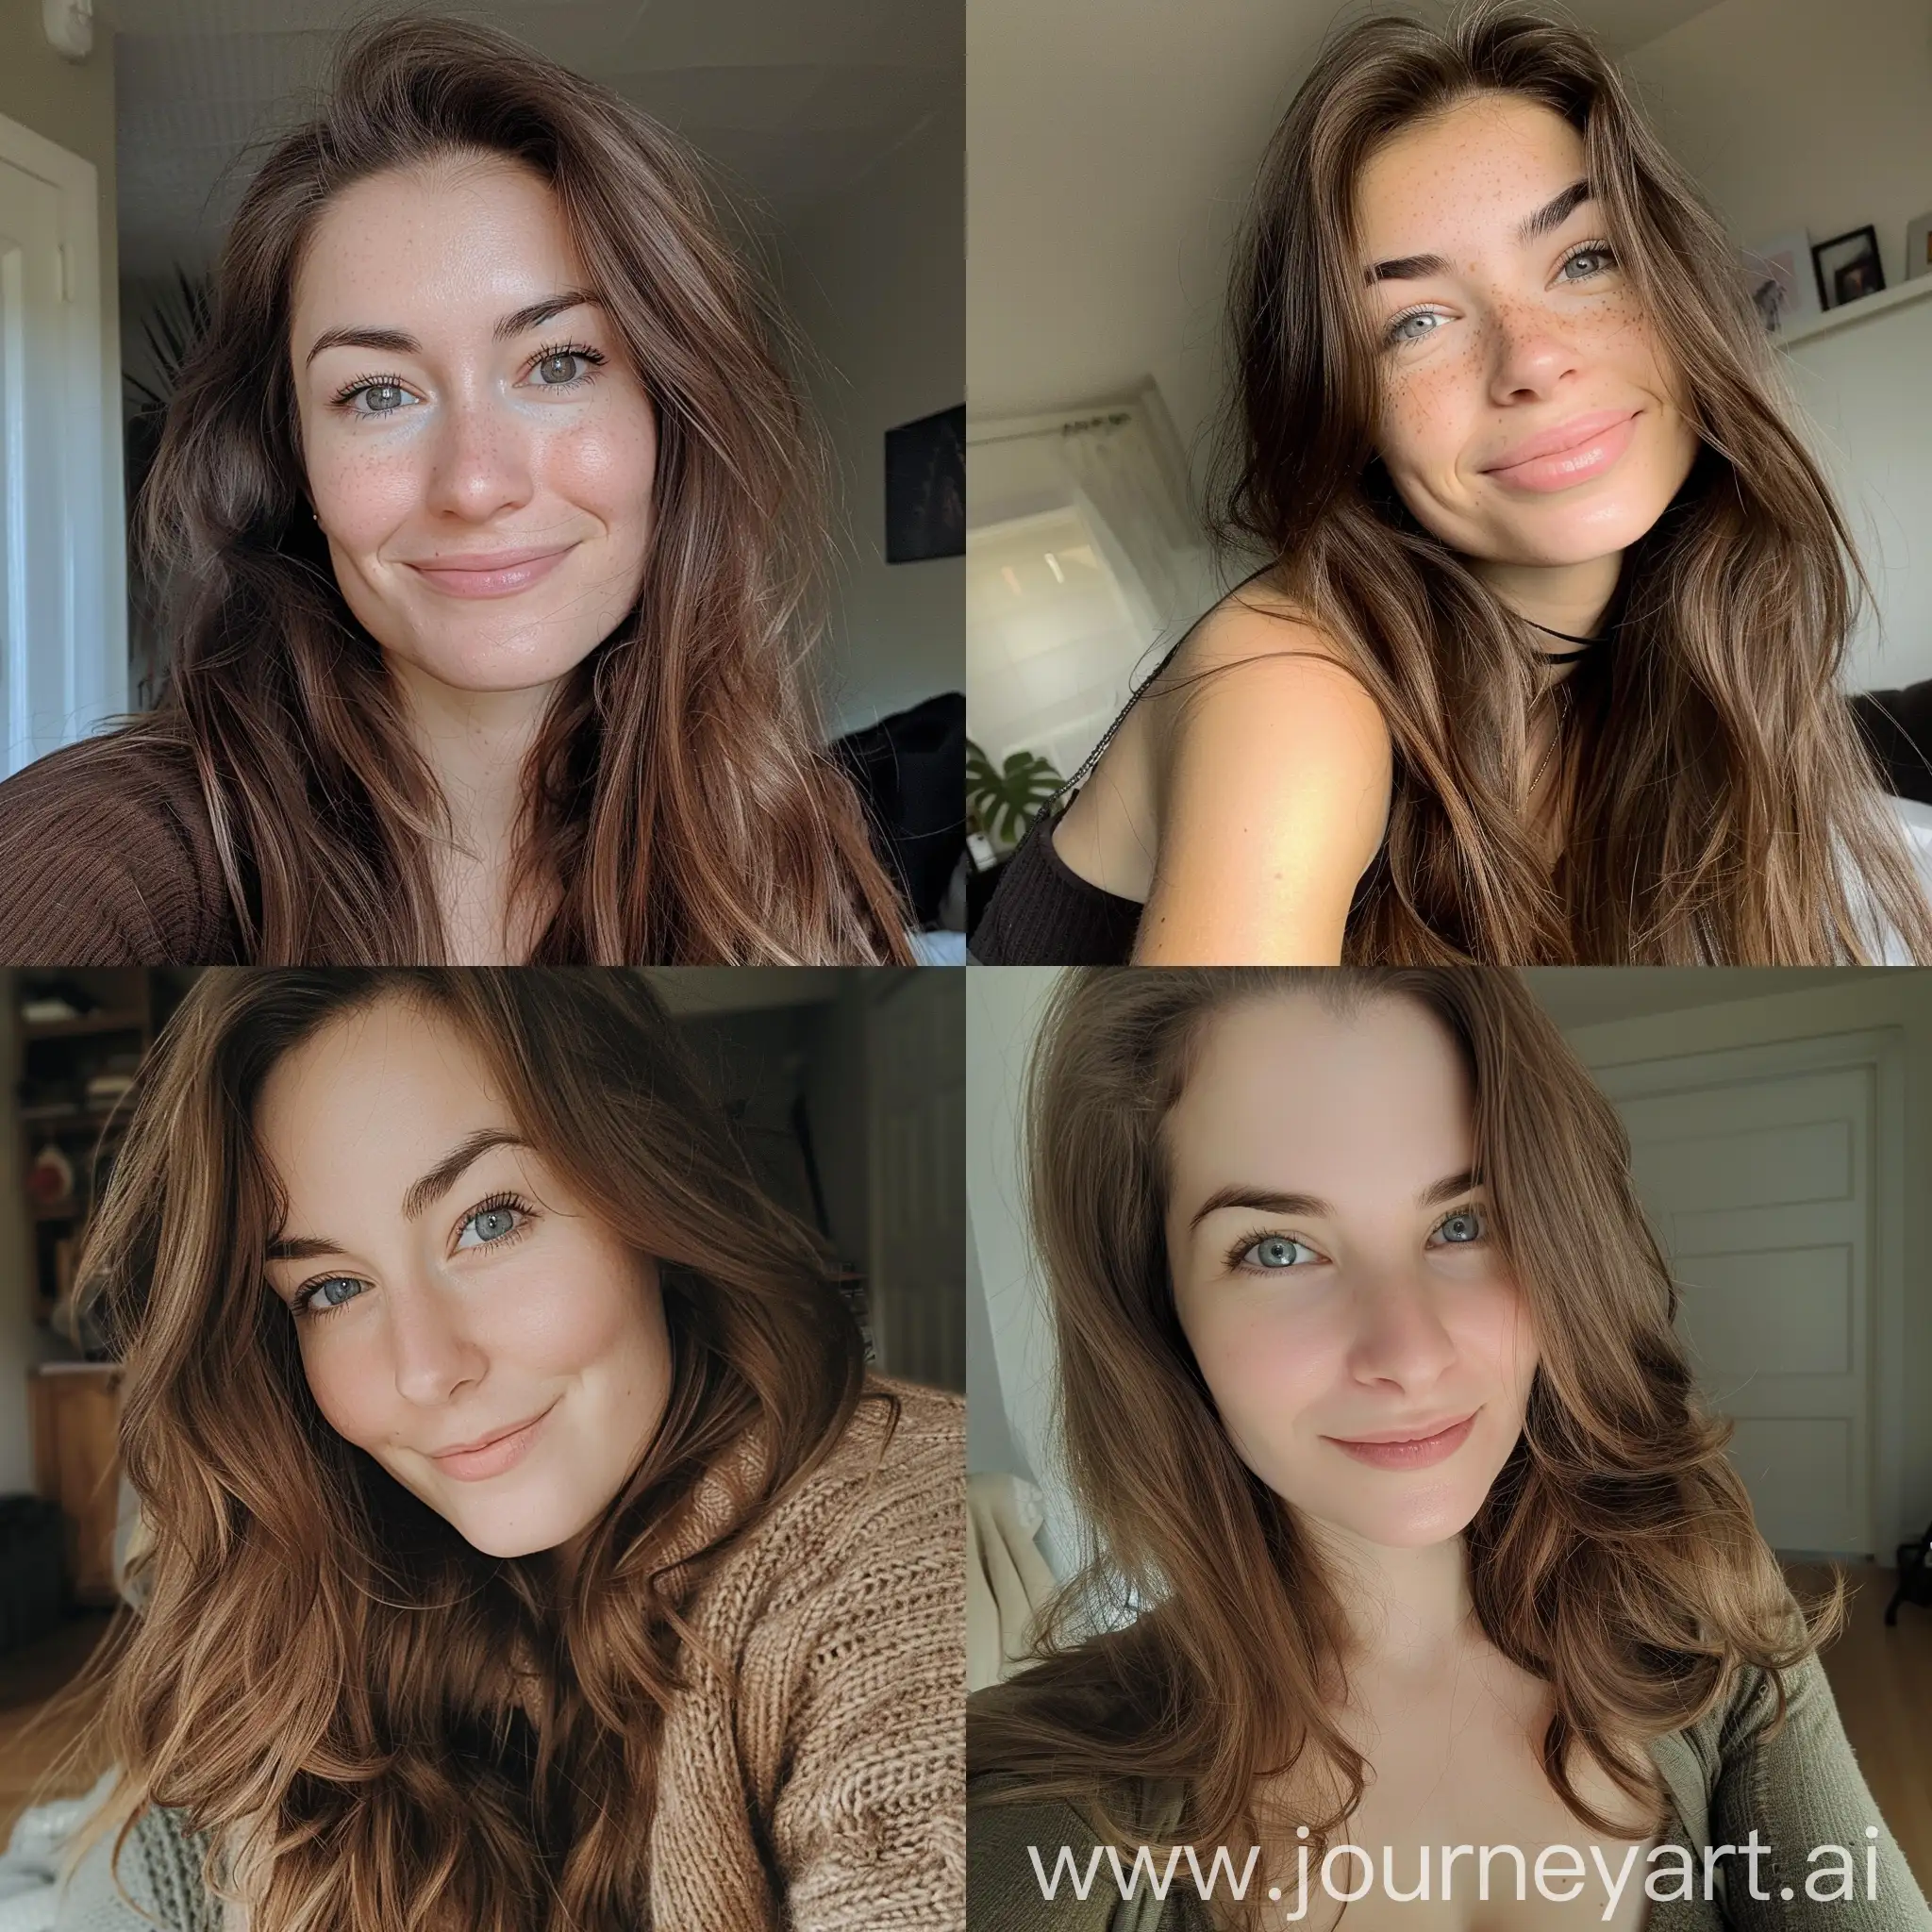 BrownHaired-Woman-Taking-Interior-Selfies-with-Attractive-Smile